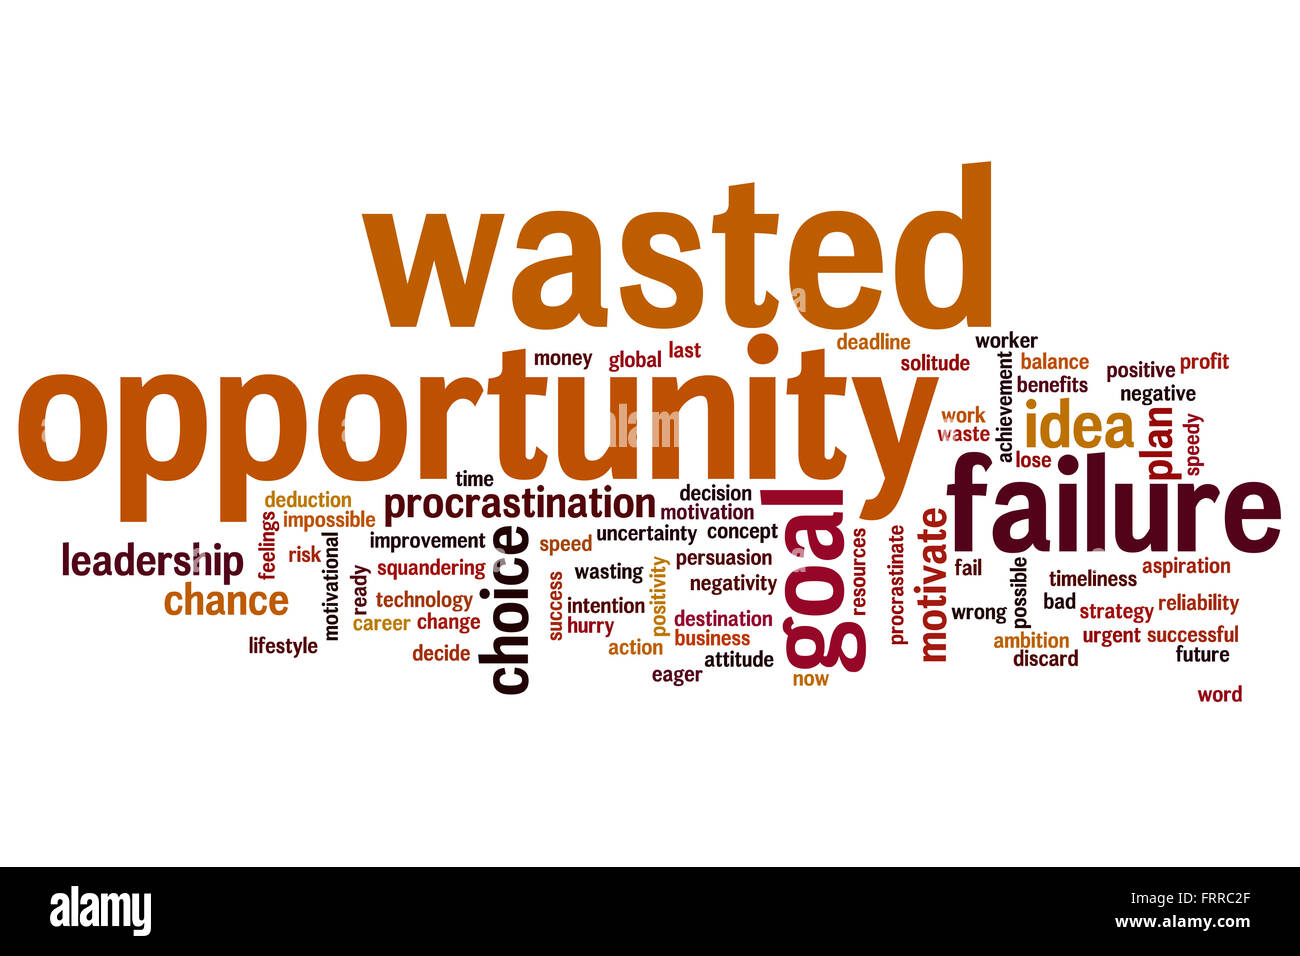 Wasted opportunity concept word cloud background Stock Photo